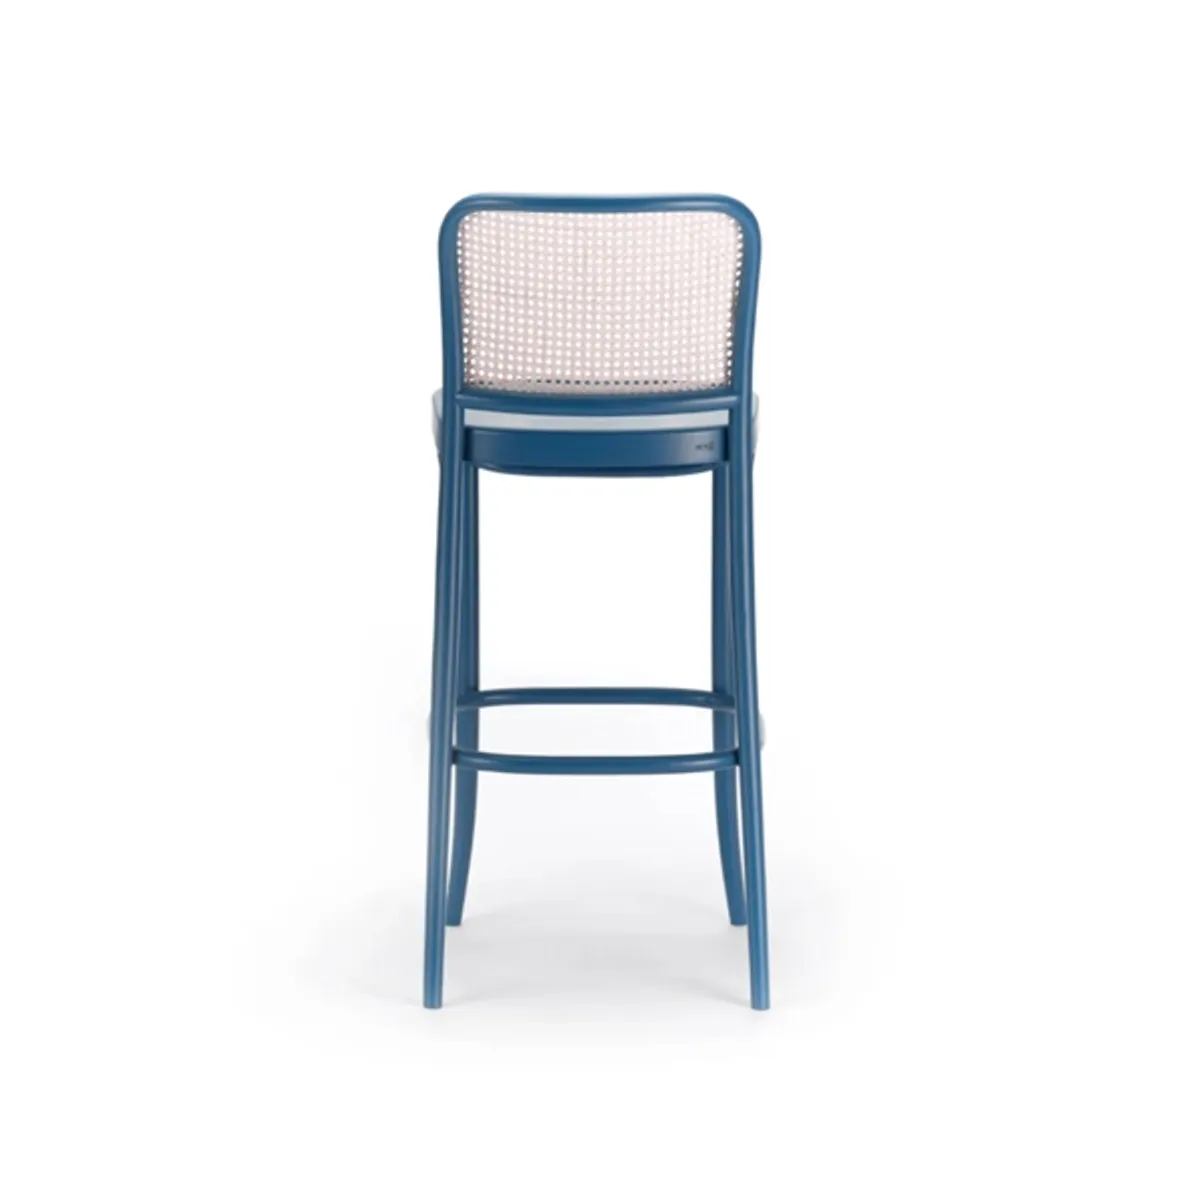 Bombay wood bar stool Inside Out Contracts2